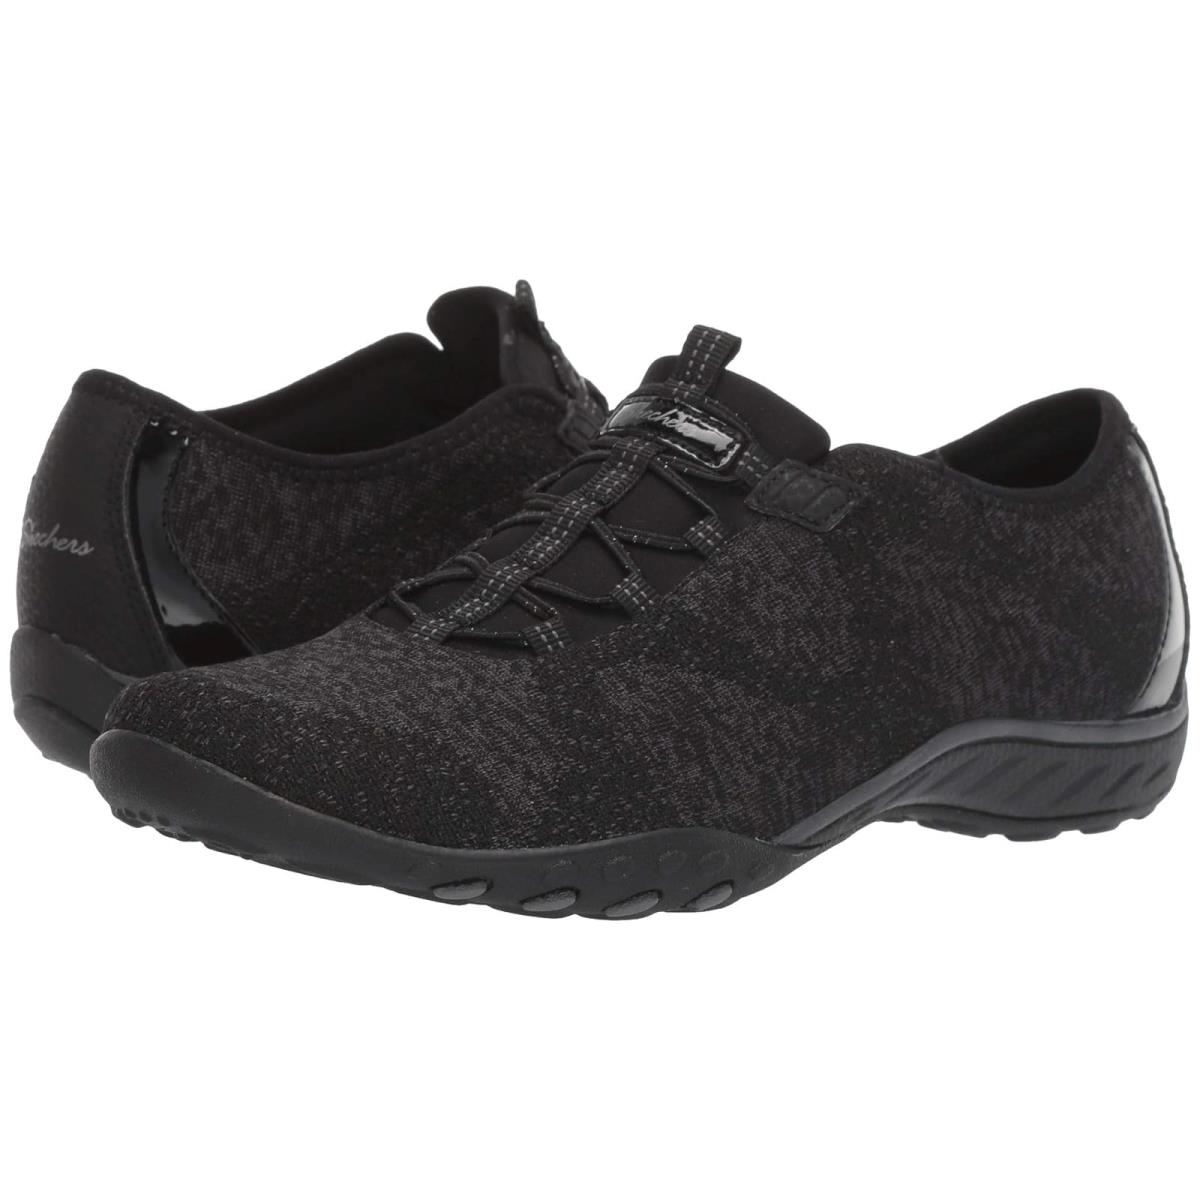 Woman`s Sneakers Athletic Shoes Skechers Breathe-easy - Opportuknity Black